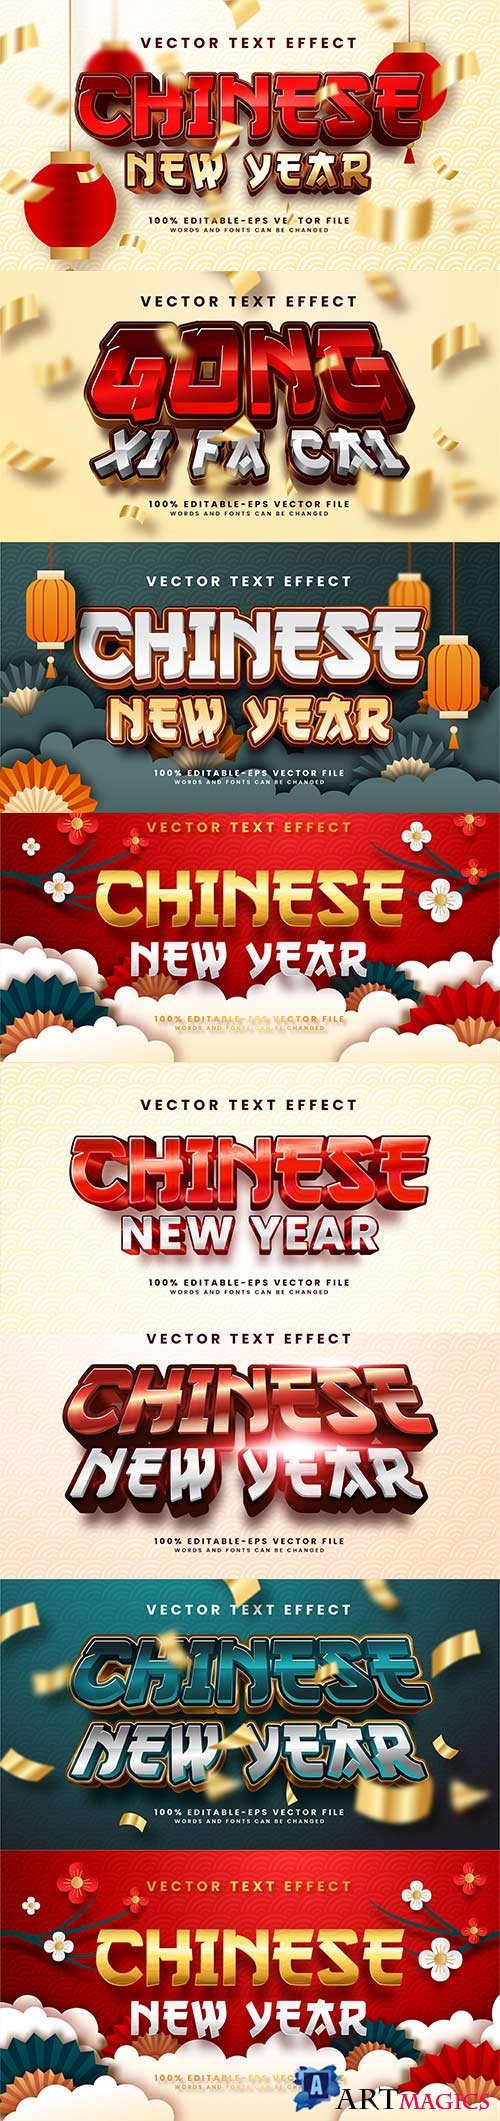 Chinese new year editable text style effect with red color theme, suitable for asian event concept